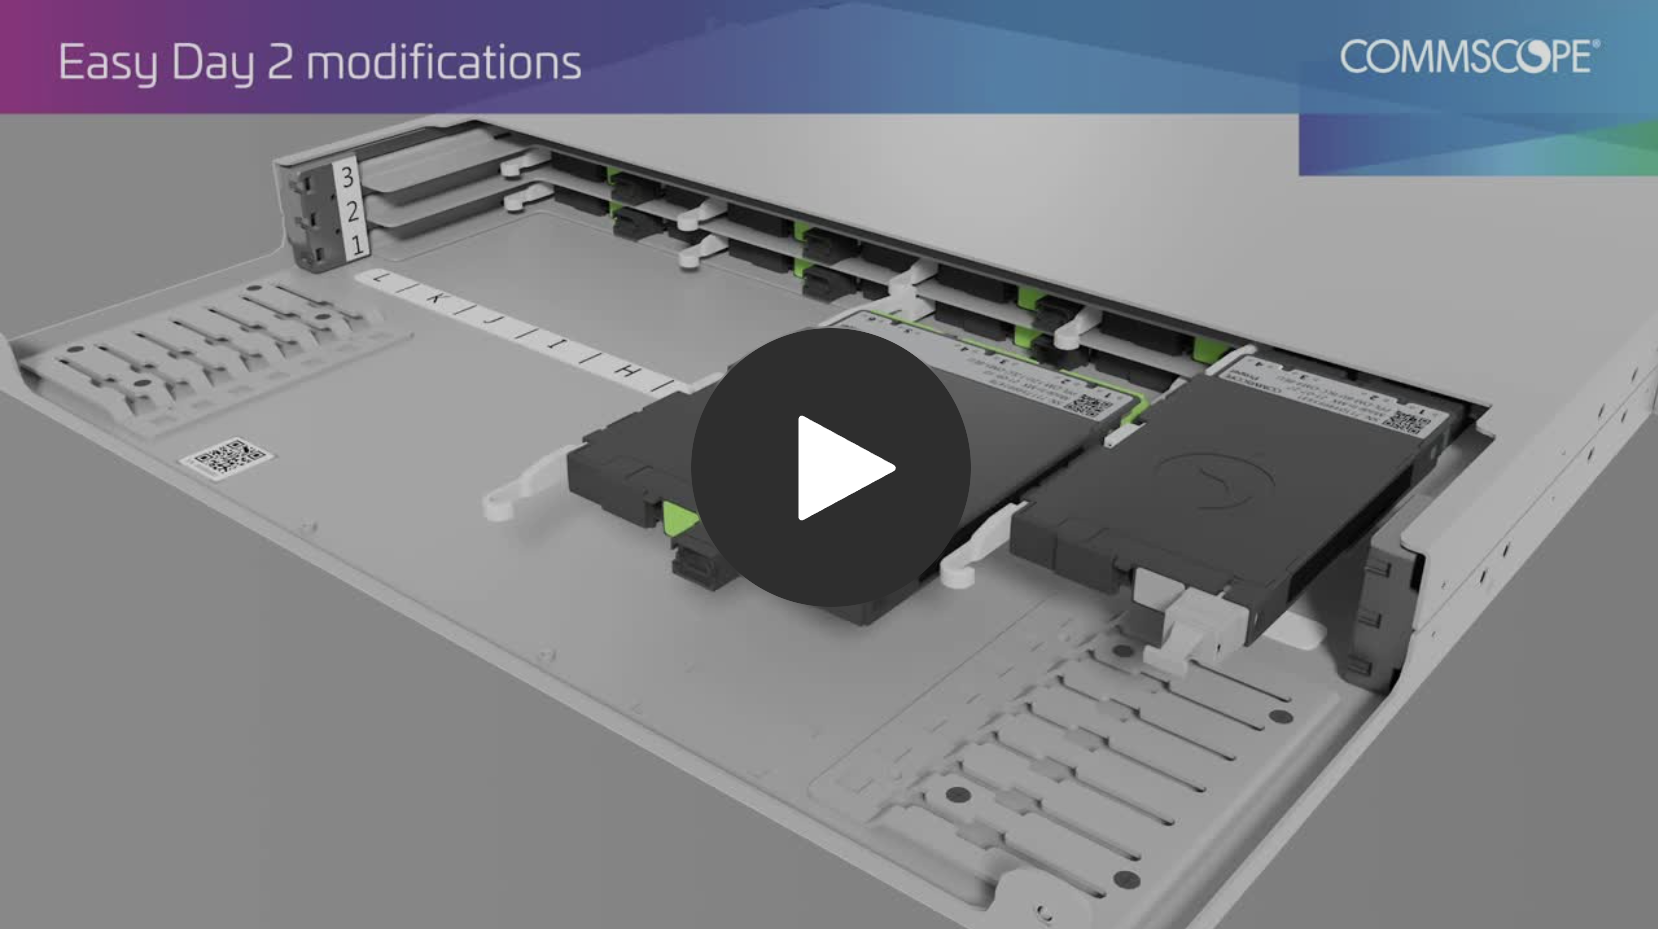 commscope easy day 2 modifications video